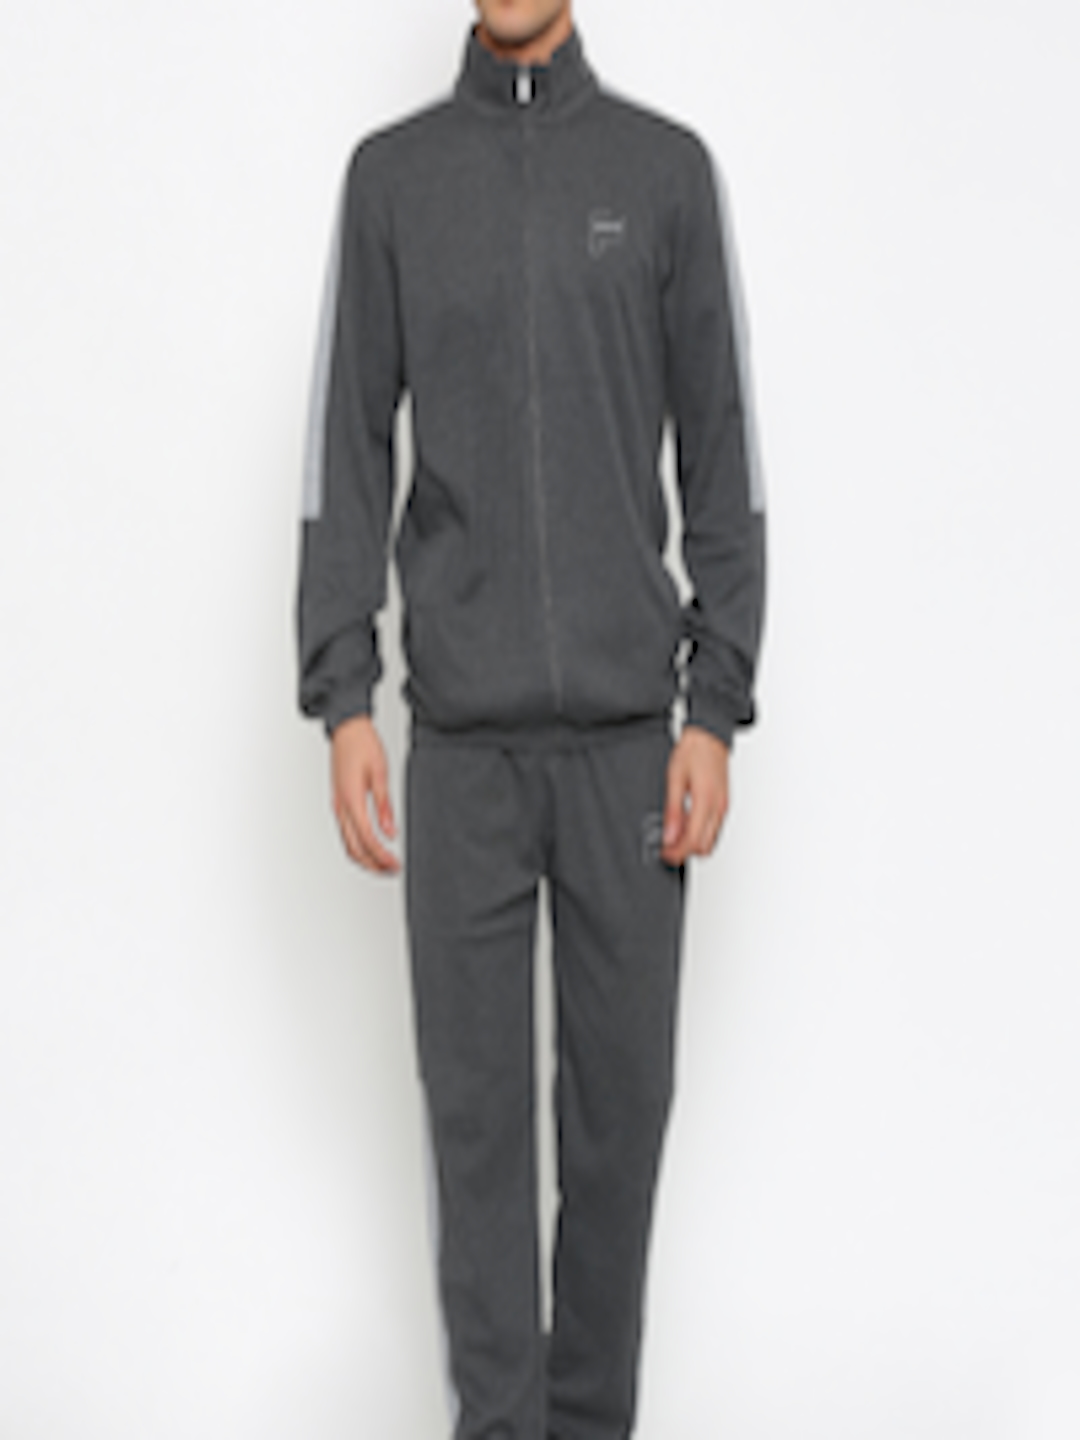 Buy FILA Charcoal Grey Tracksuit - Tracksuits for Men 1782310 | Myntra